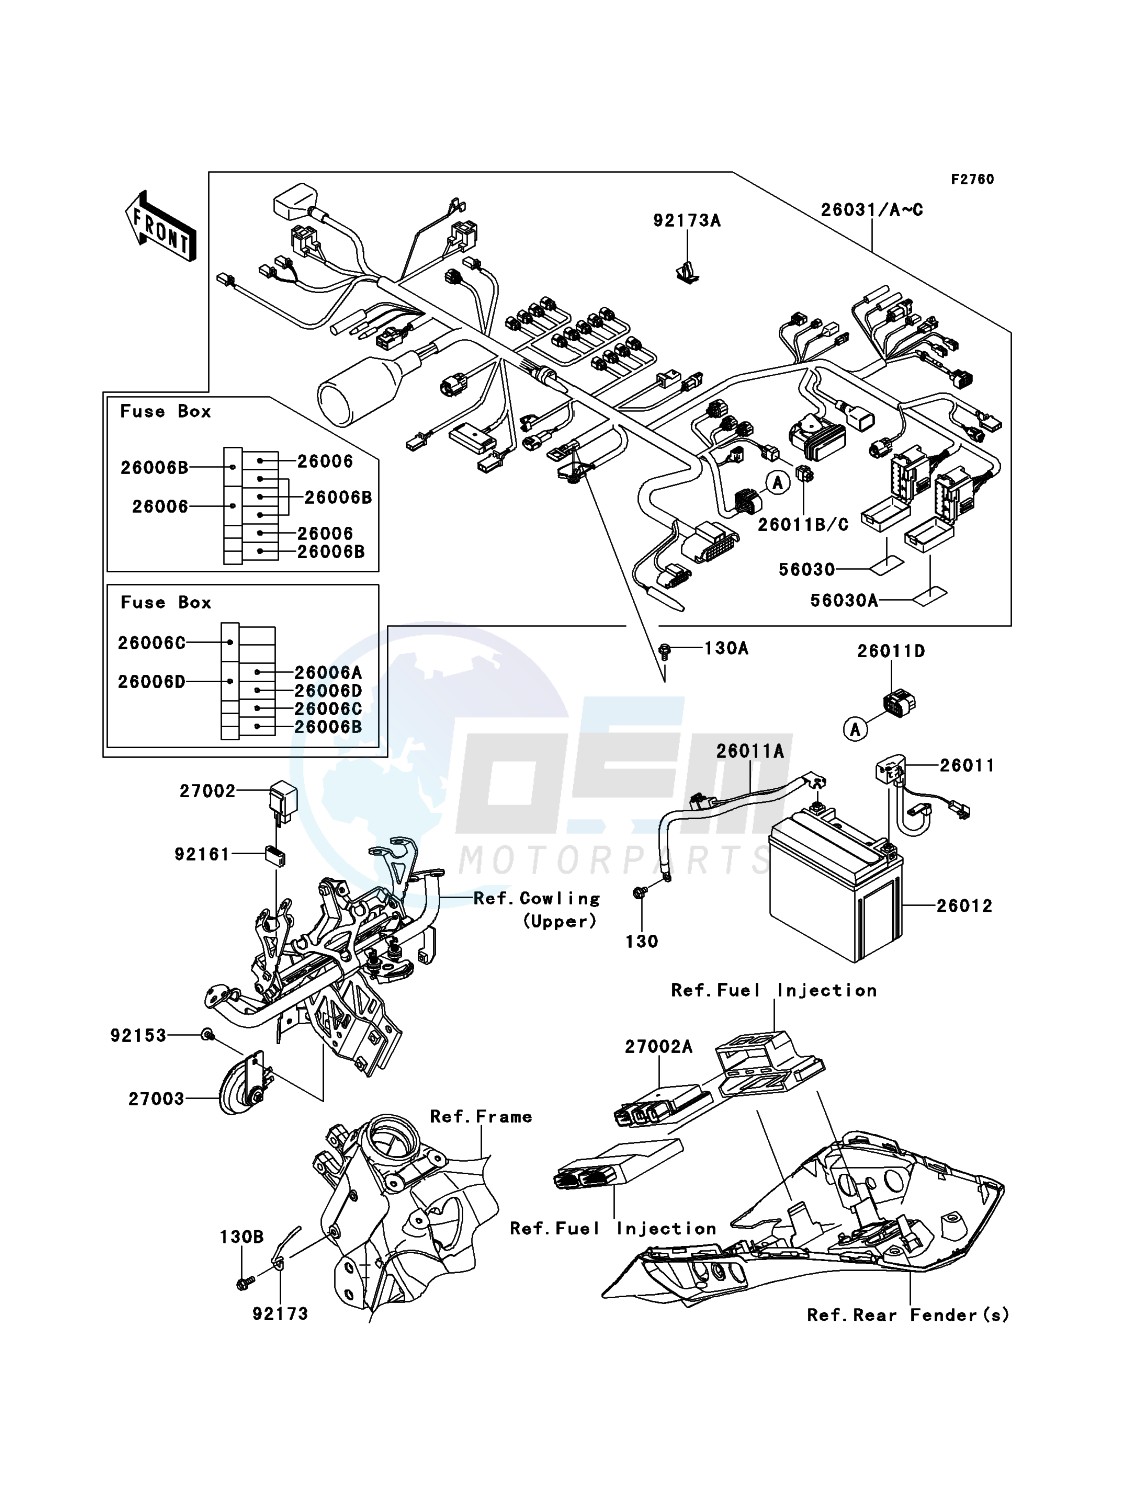 Chassis Electrical Equipment image